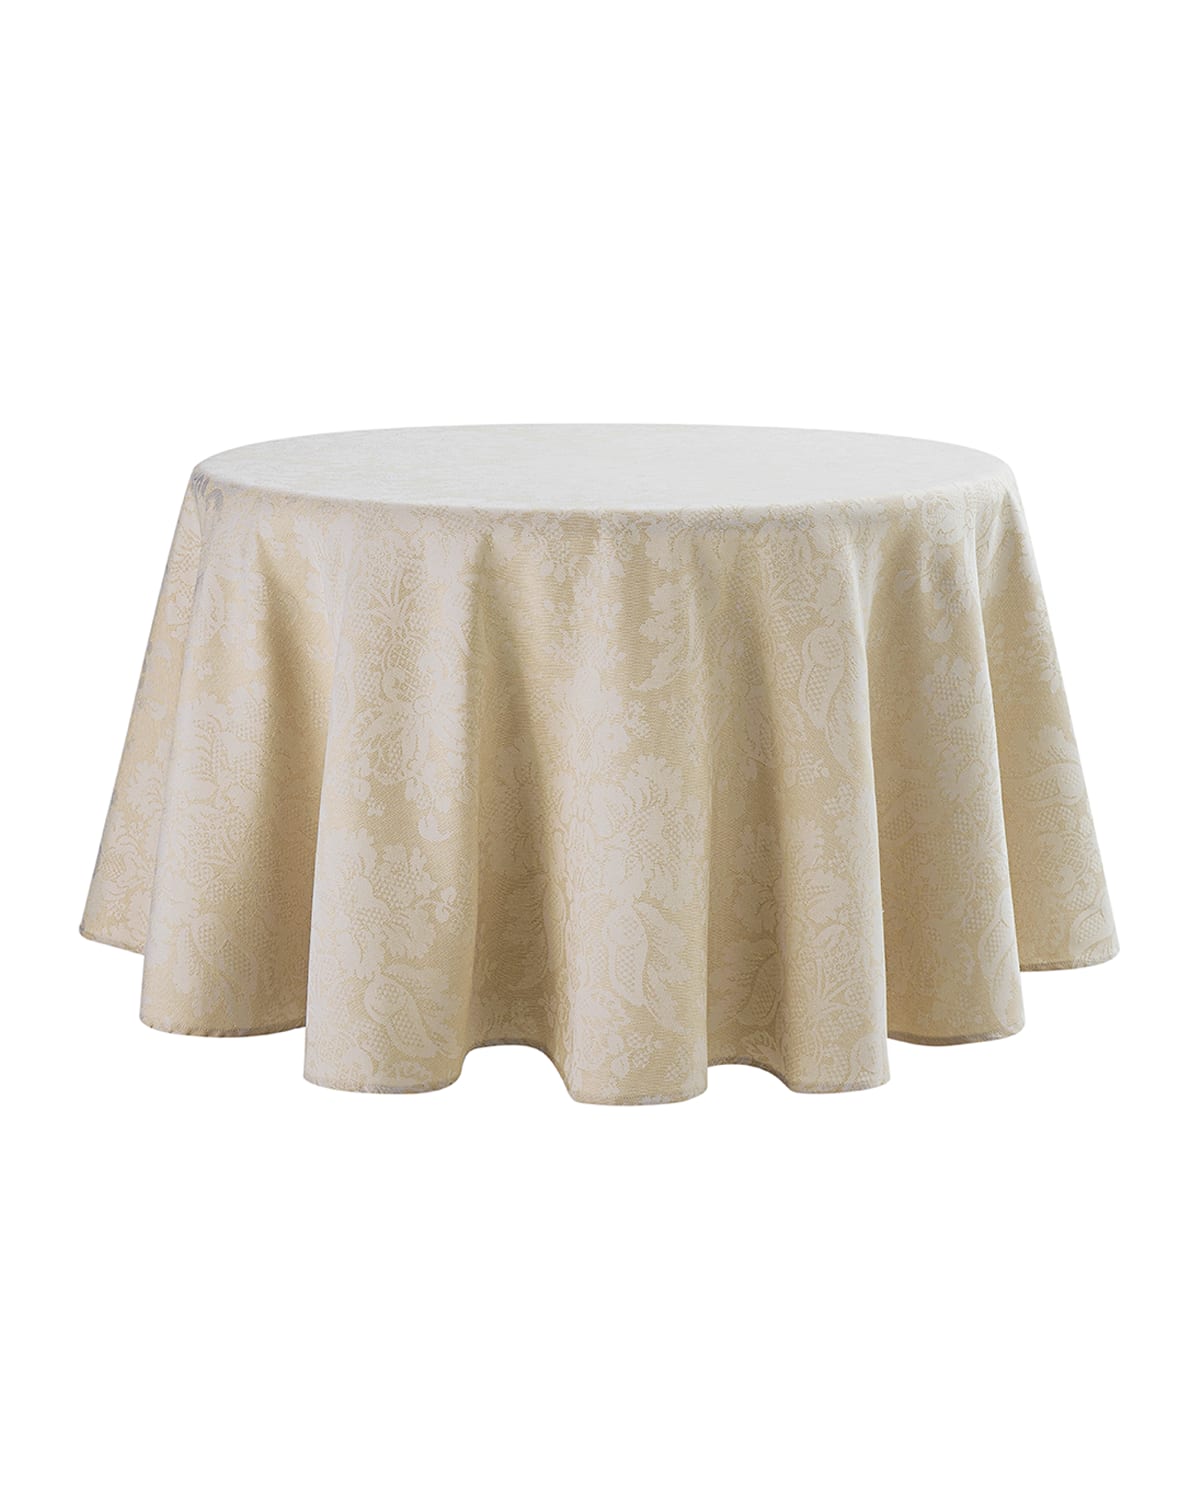 Image Waterford Berrigan Round Tablecloth, 70"Dia.